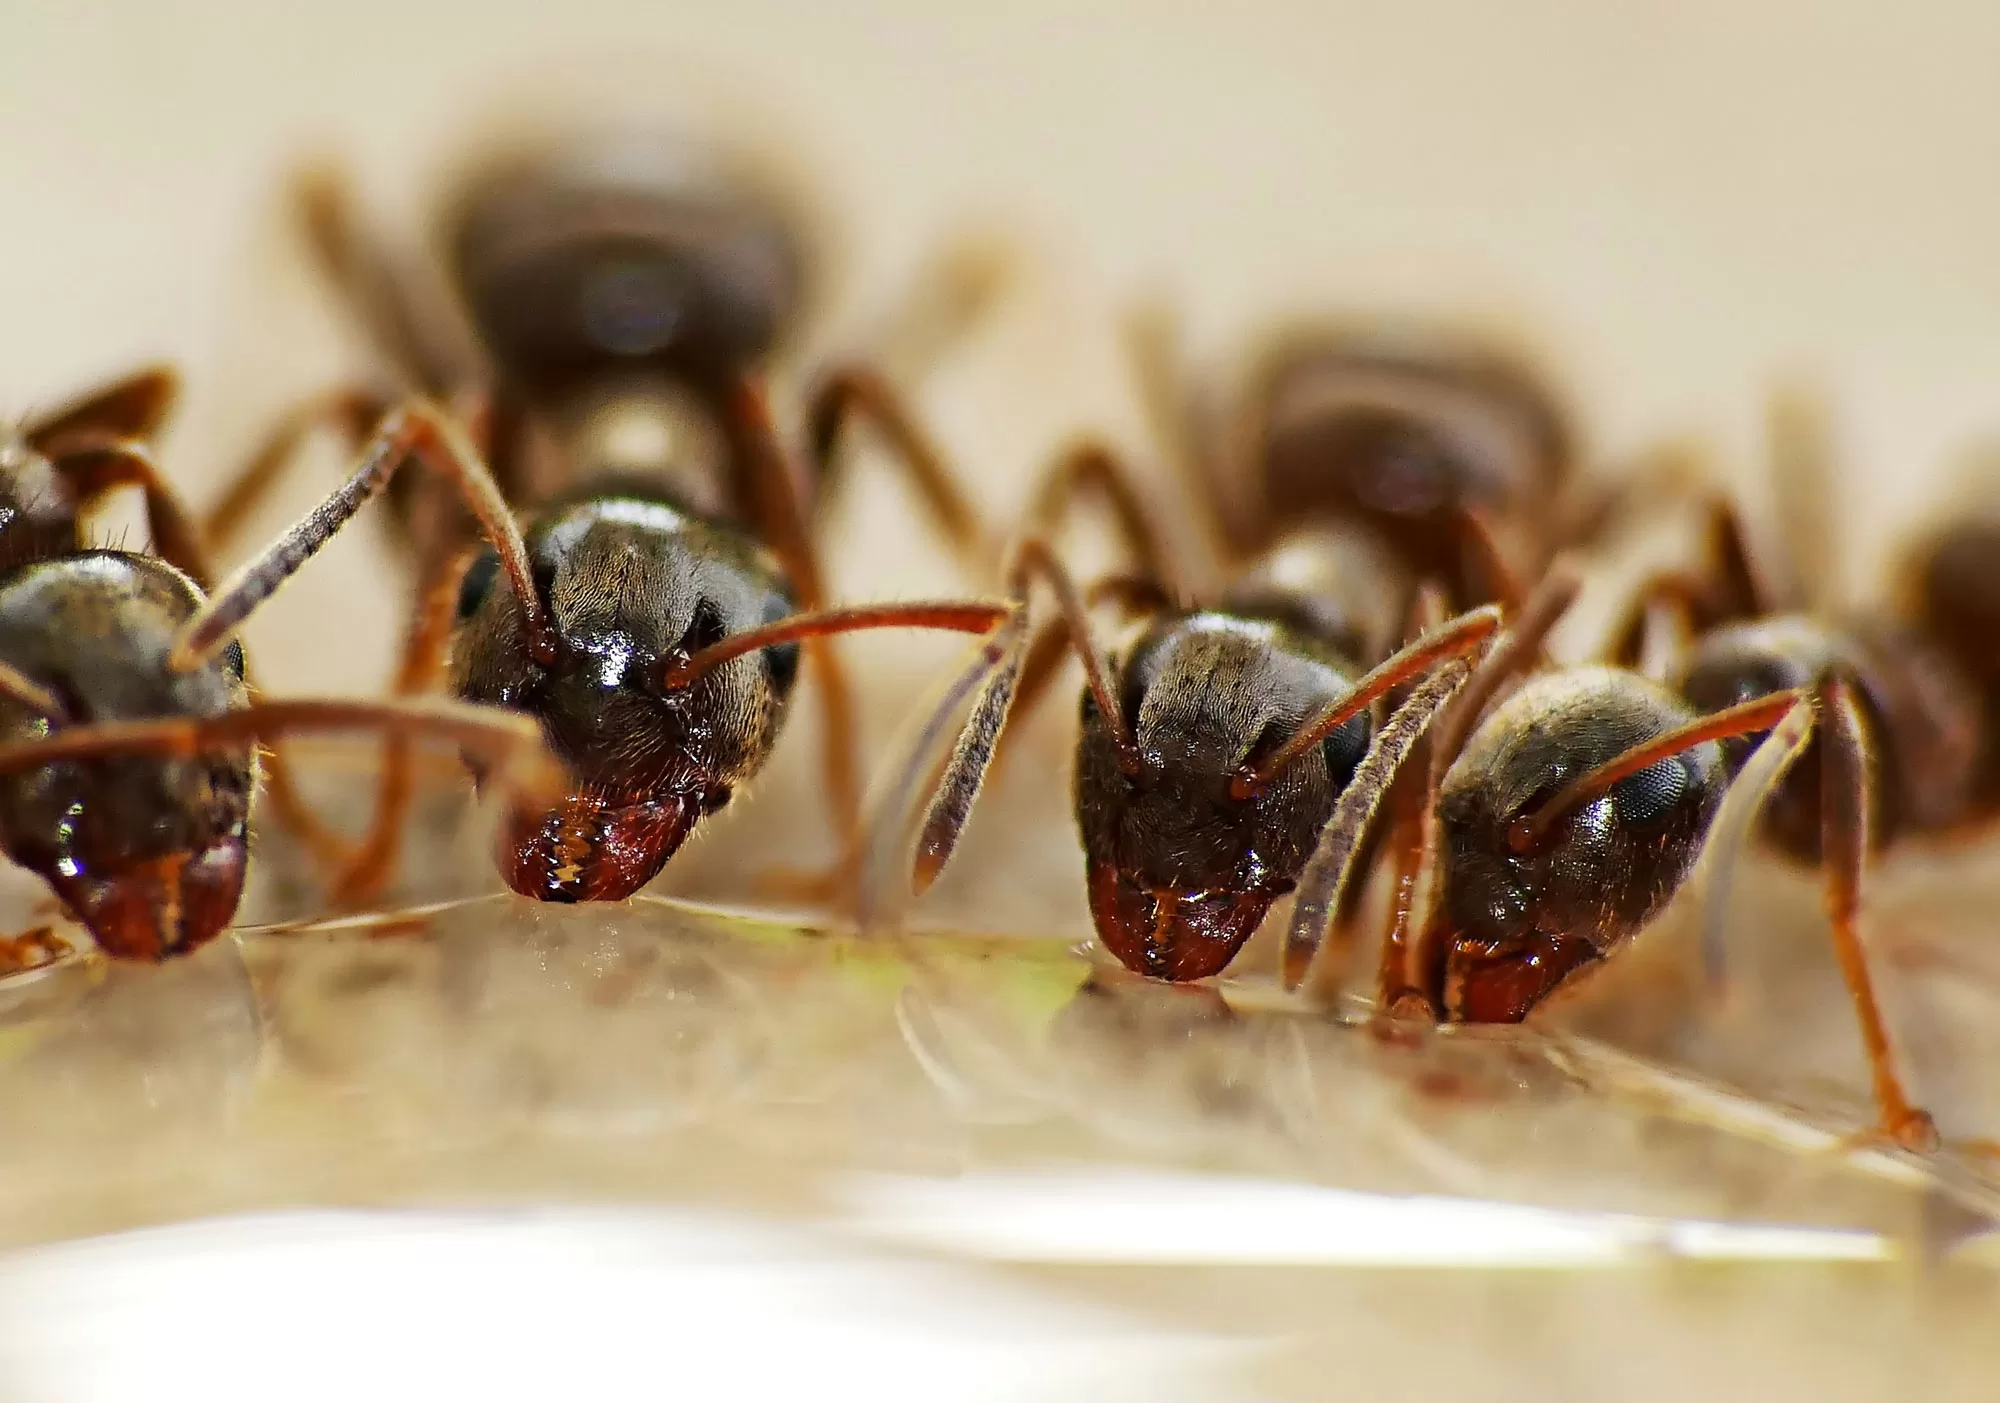 Lasius workers taking a drink. Photo courtesy of gamagapix on Pixabay.